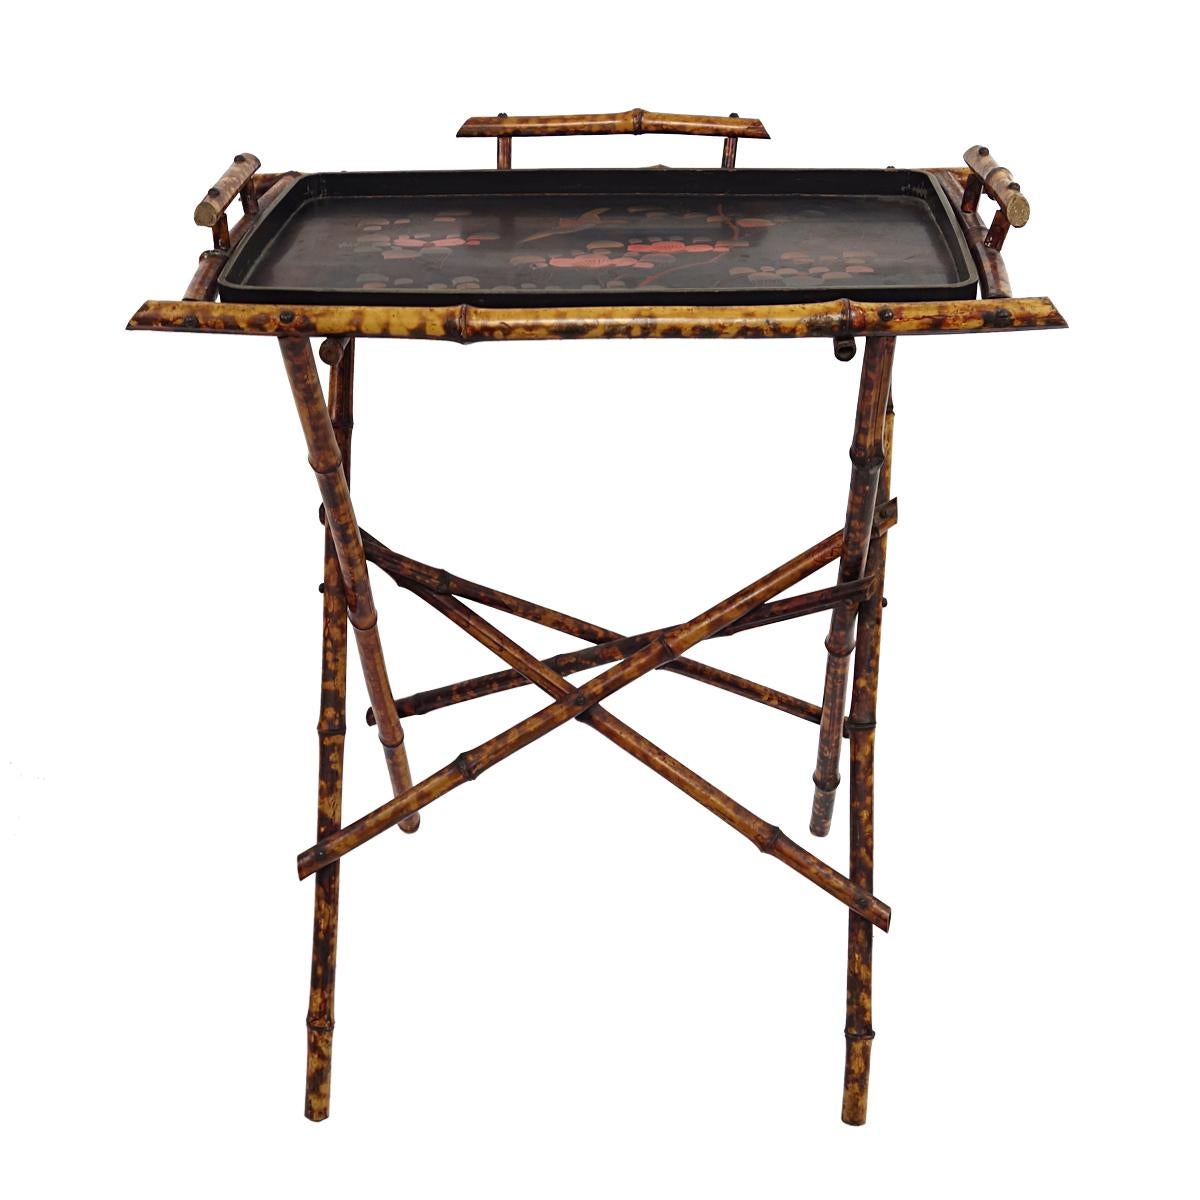 Very refined tray table with removable tray with oriental origins, probably from 1920s China.

The frame looks pleasantly fragile and is made of bamboo. The tray is made of lacquered wood and has been decorated with flowers and a bird.

A very